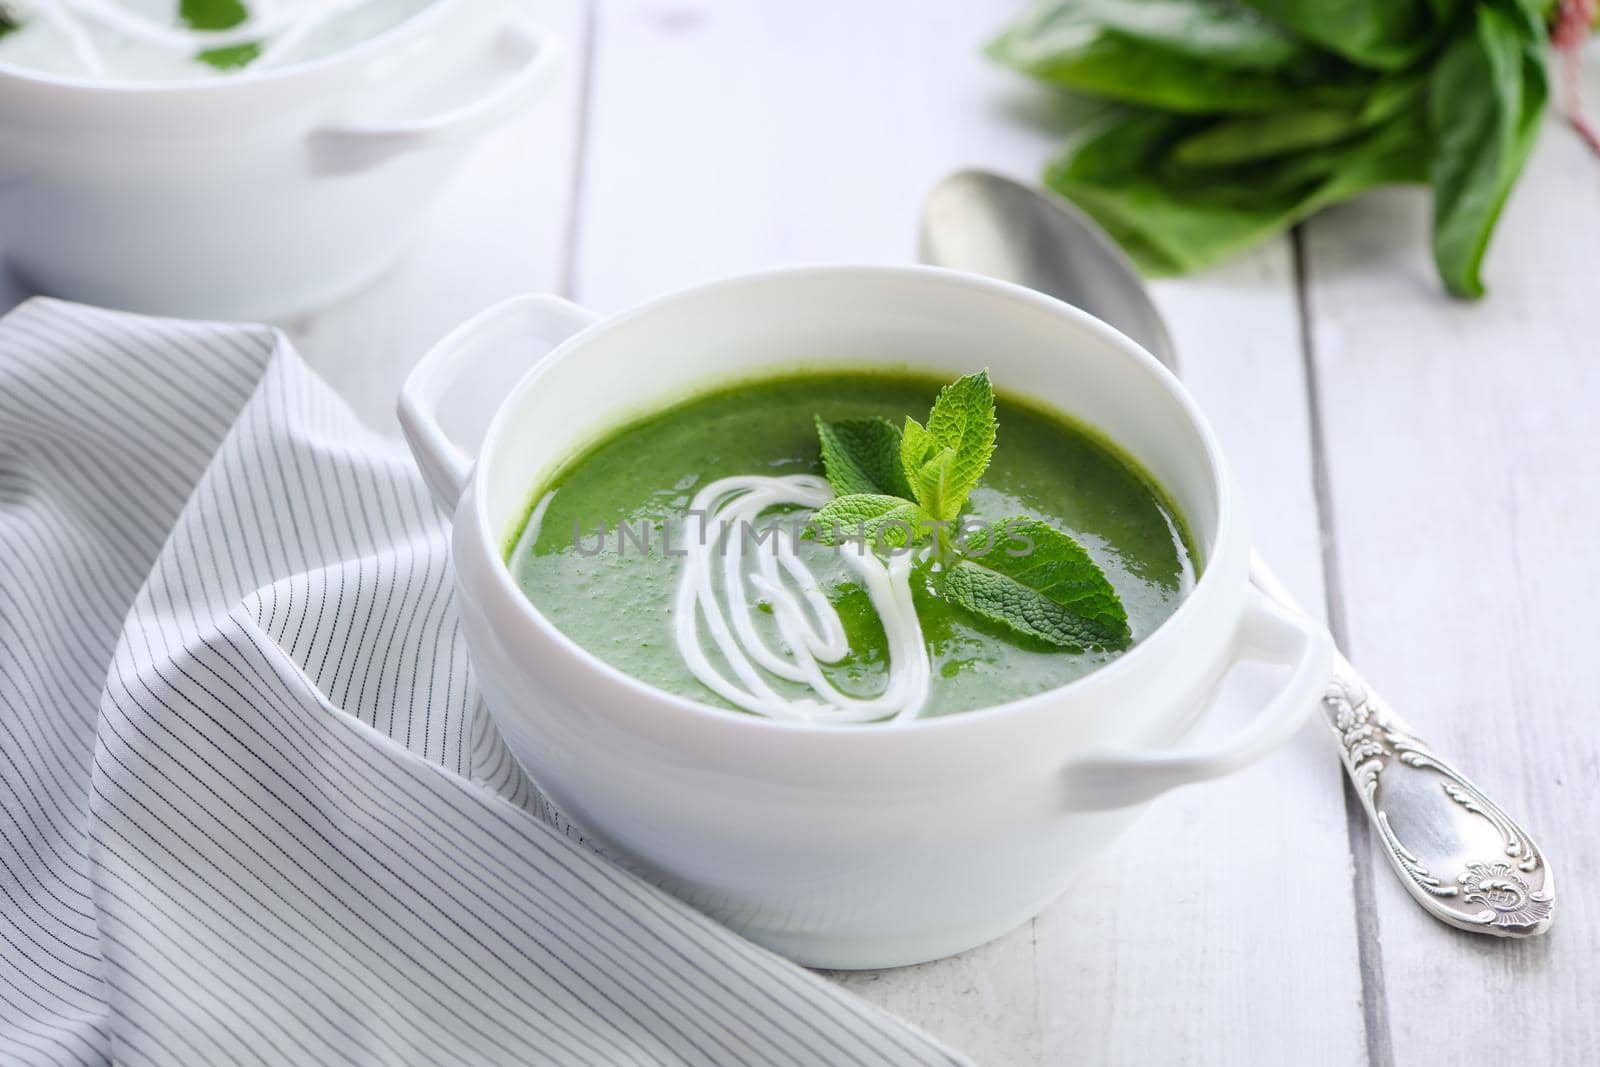 Spinach puree soup seasoned with cream and mint

